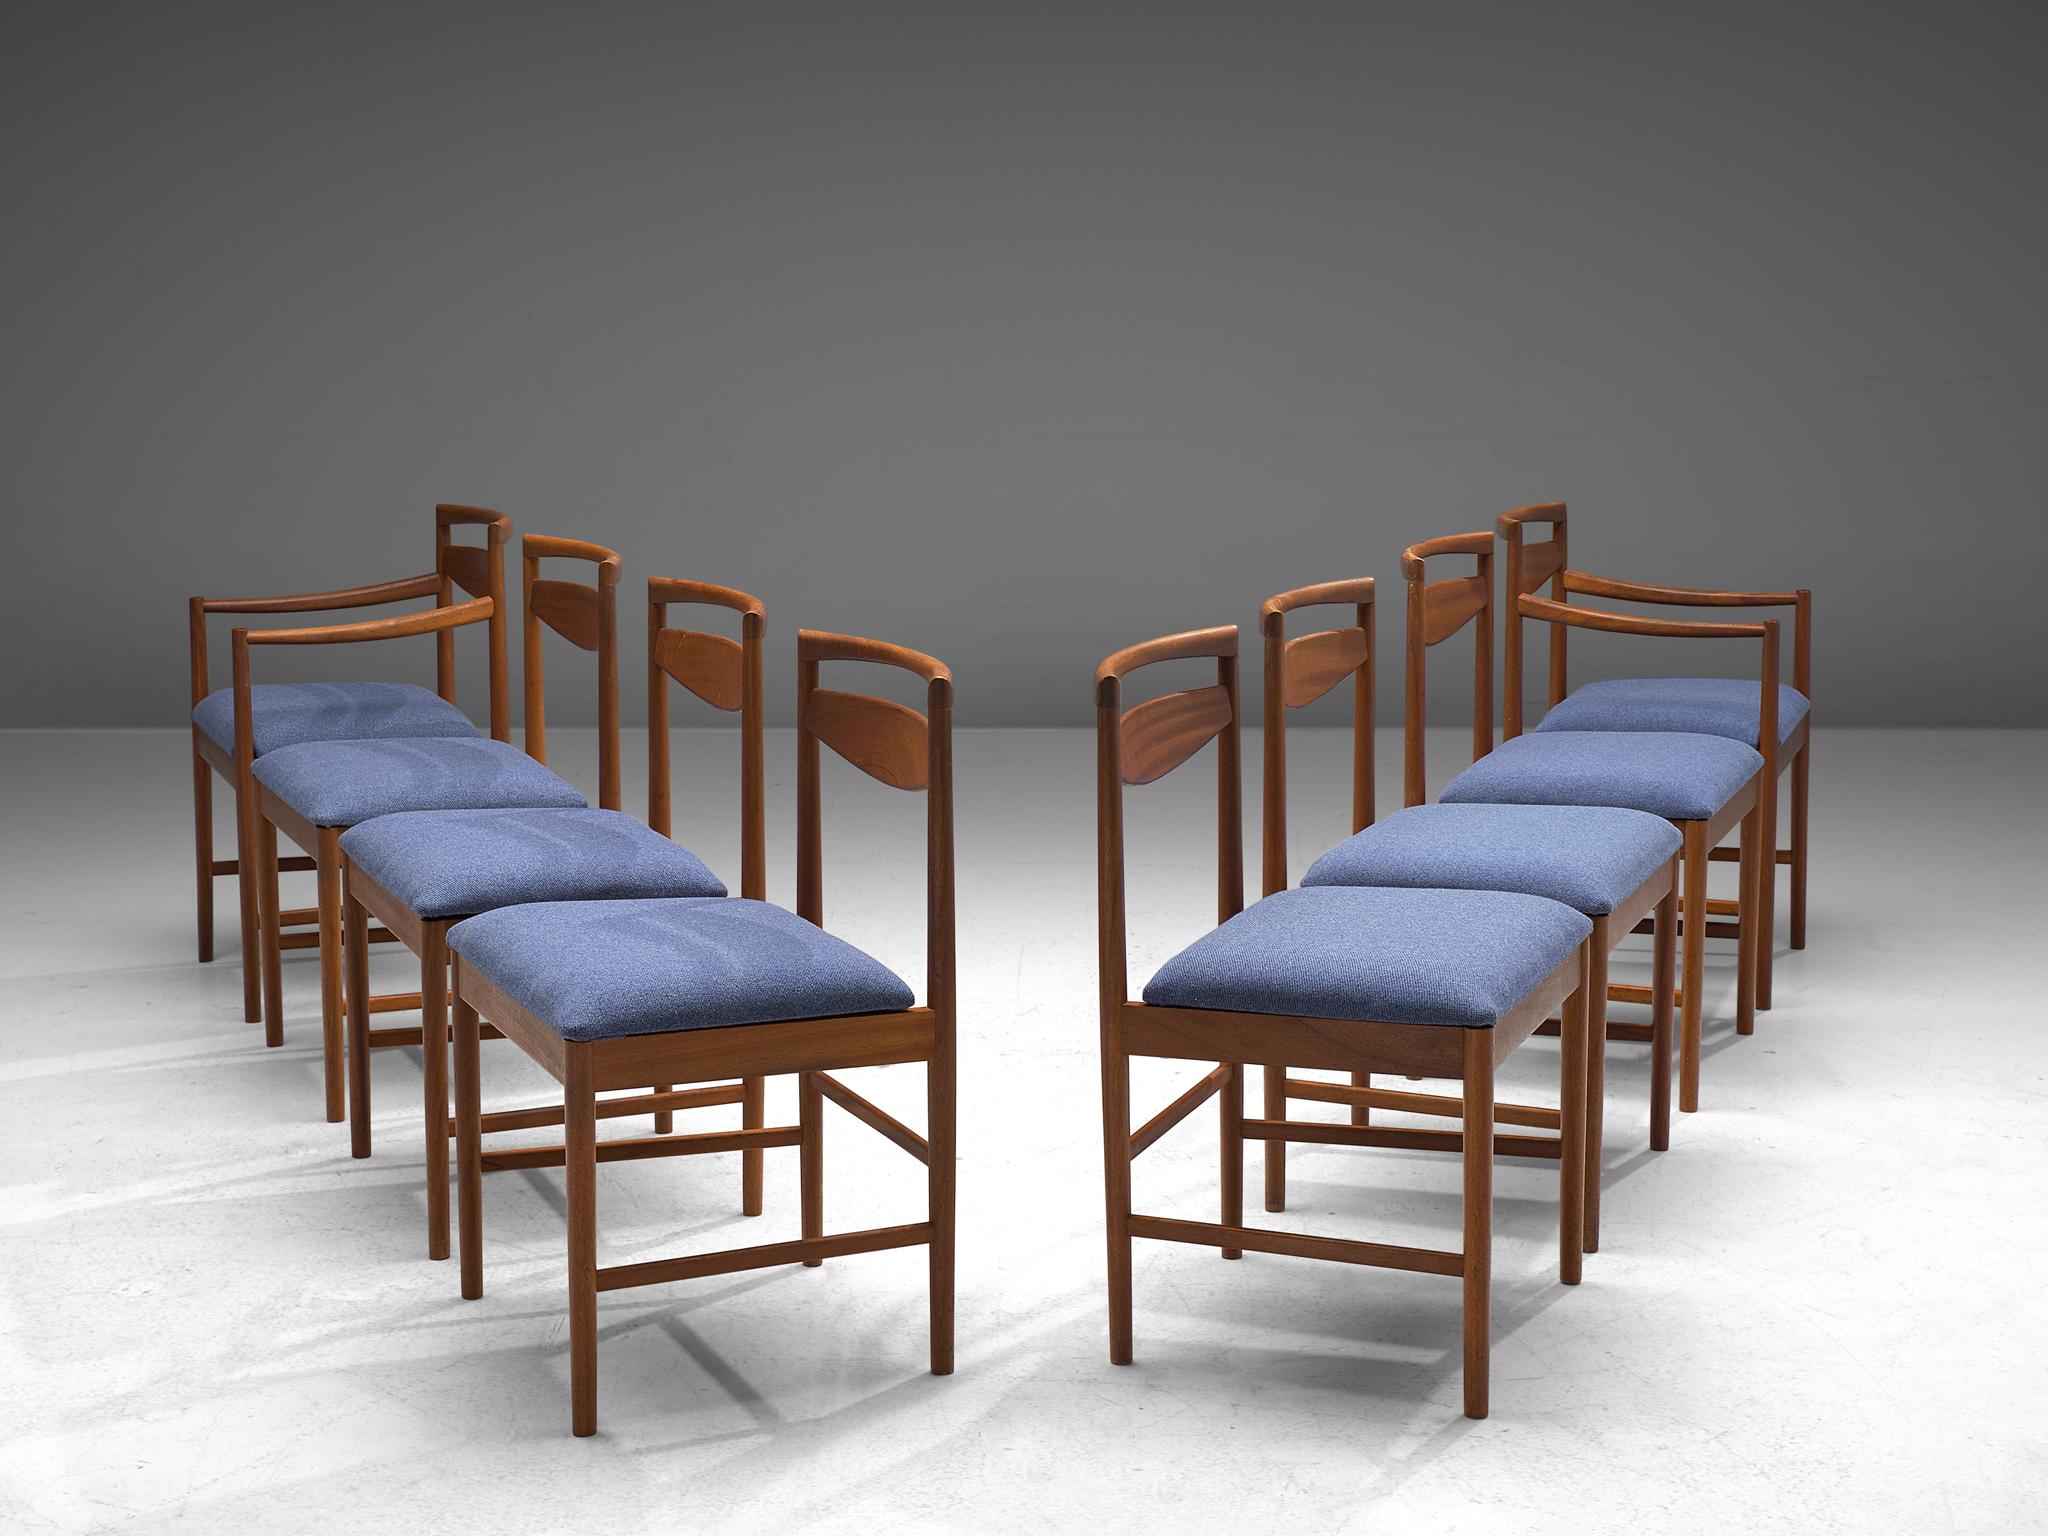 Set of 8 dining chairs, teak and fabric, Denmark, 1960s

Stunning set of dining chairs with striking backrests. The set consists of two armchairs and six chairs without arms. The model is angular and modest as it is build up in mainly horizontal and